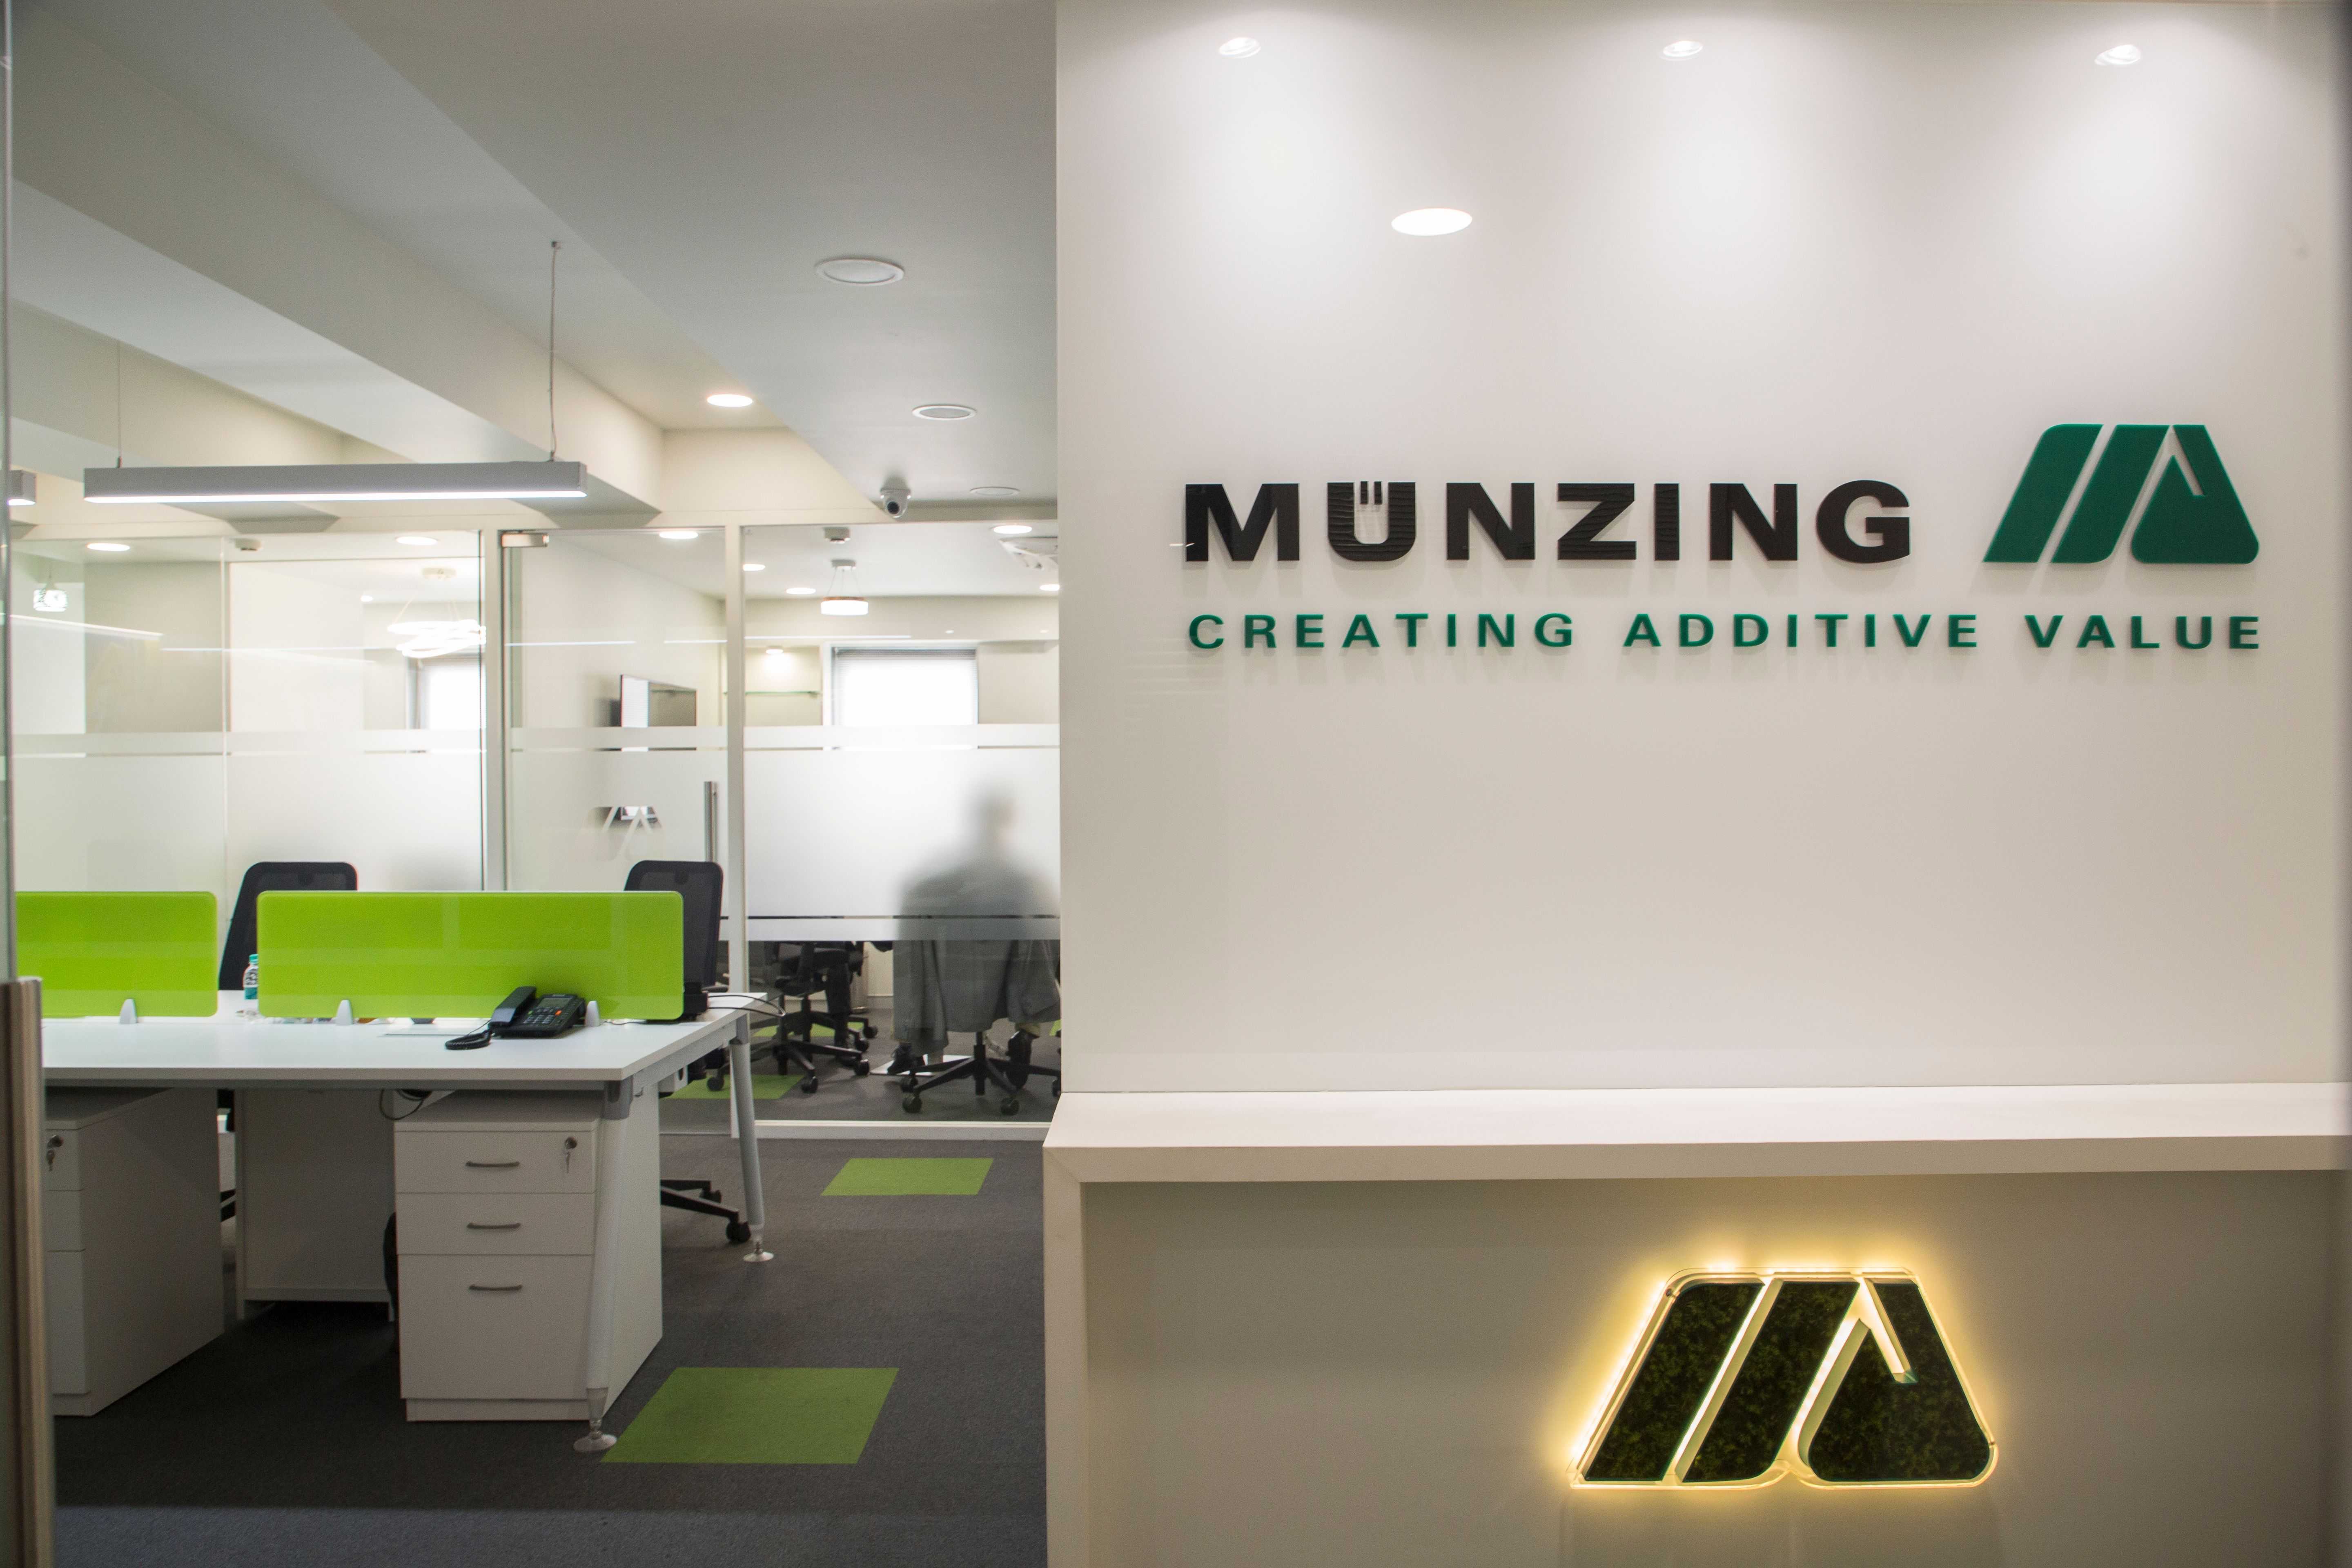 MÜNZING Mumbai Pvt. Ltd., the MÜNZING location in Mumbai, India, was established in August 2017. In the past four years, the team grew up to three Sales Managers, who take care of direct sales of our MÜNZING products in India, as well as neighboring countries like Sri Lanka, Bangladesh, Nepal, Bhutan and Maldives. 
Besides of direct sales, MÜNZING Mumbai is also working together with sales partners that are selected for their excellent expertise to distribute our whole product range of additives and waxes in their respective regions to major players in paints and coatings and constructions industries. But also the industries of industrial fluids, wood processing and food processing gain rising relevance.
The overall sales volume in India is to the tune of approx. 400mt of additives and waxes per annum. And the entity is about to grow, as MÜNZING Mumbai has plans to start its own warehousing facility over time to respond even faster to customer needs.